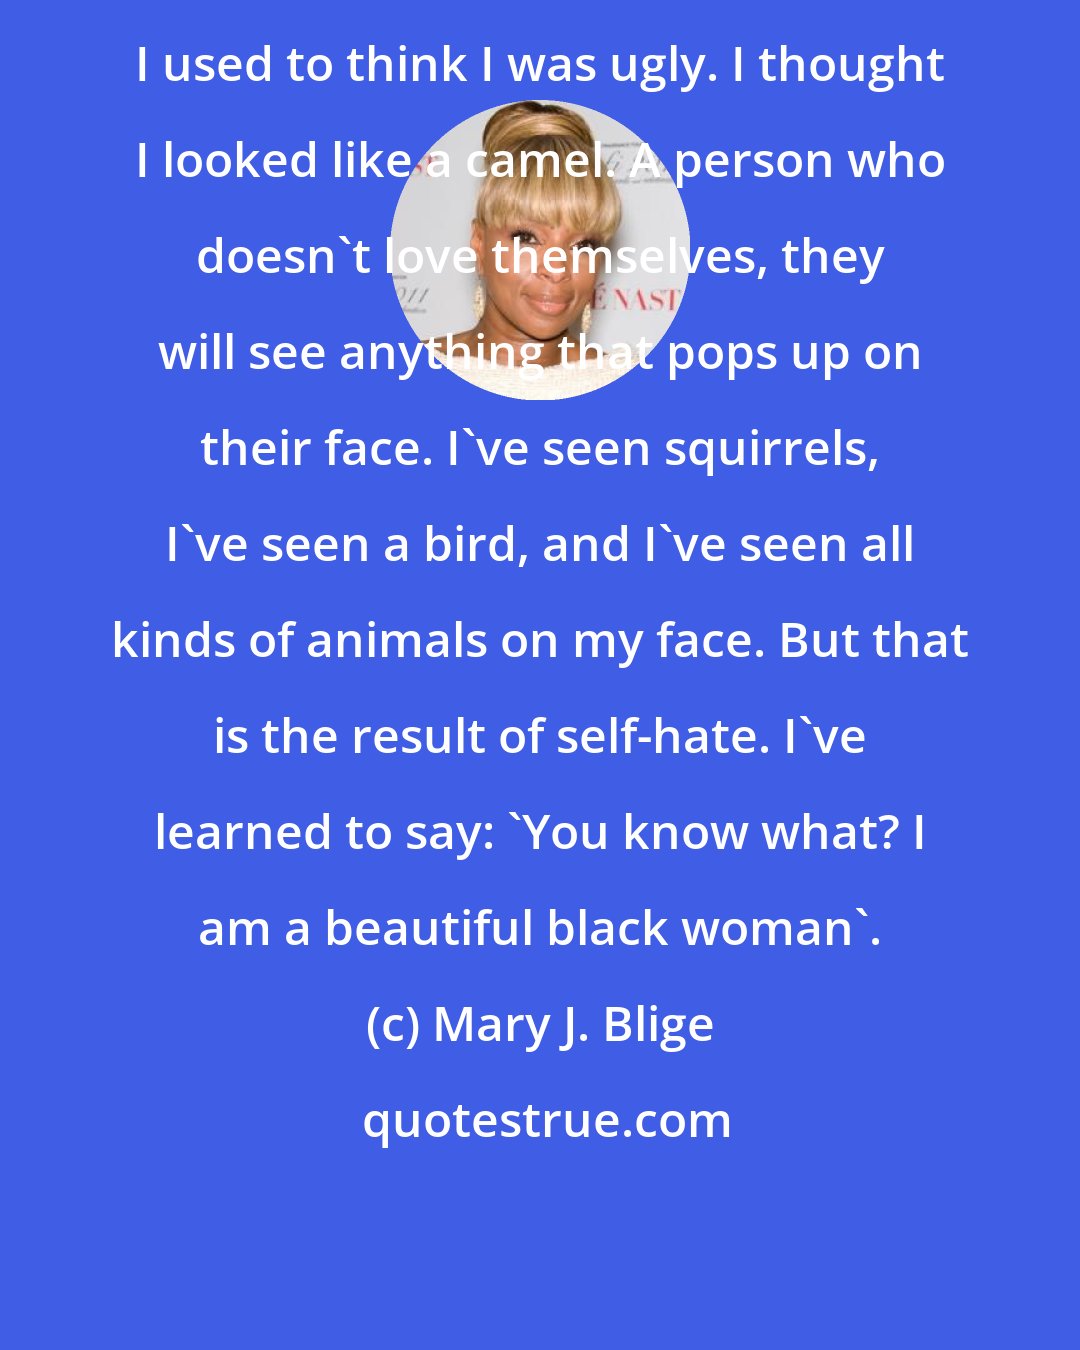 Mary J. Blige: I used to think I was ugly. I thought I looked like a camel. A person who doesn't love themselves, they will see anything that pops up on their face. I've seen squirrels, I've seen a bird, and I've seen all kinds of animals on my face. But that is the result of self-hate. I've learned to say: 'You know what? I am a beautiful black woman'.